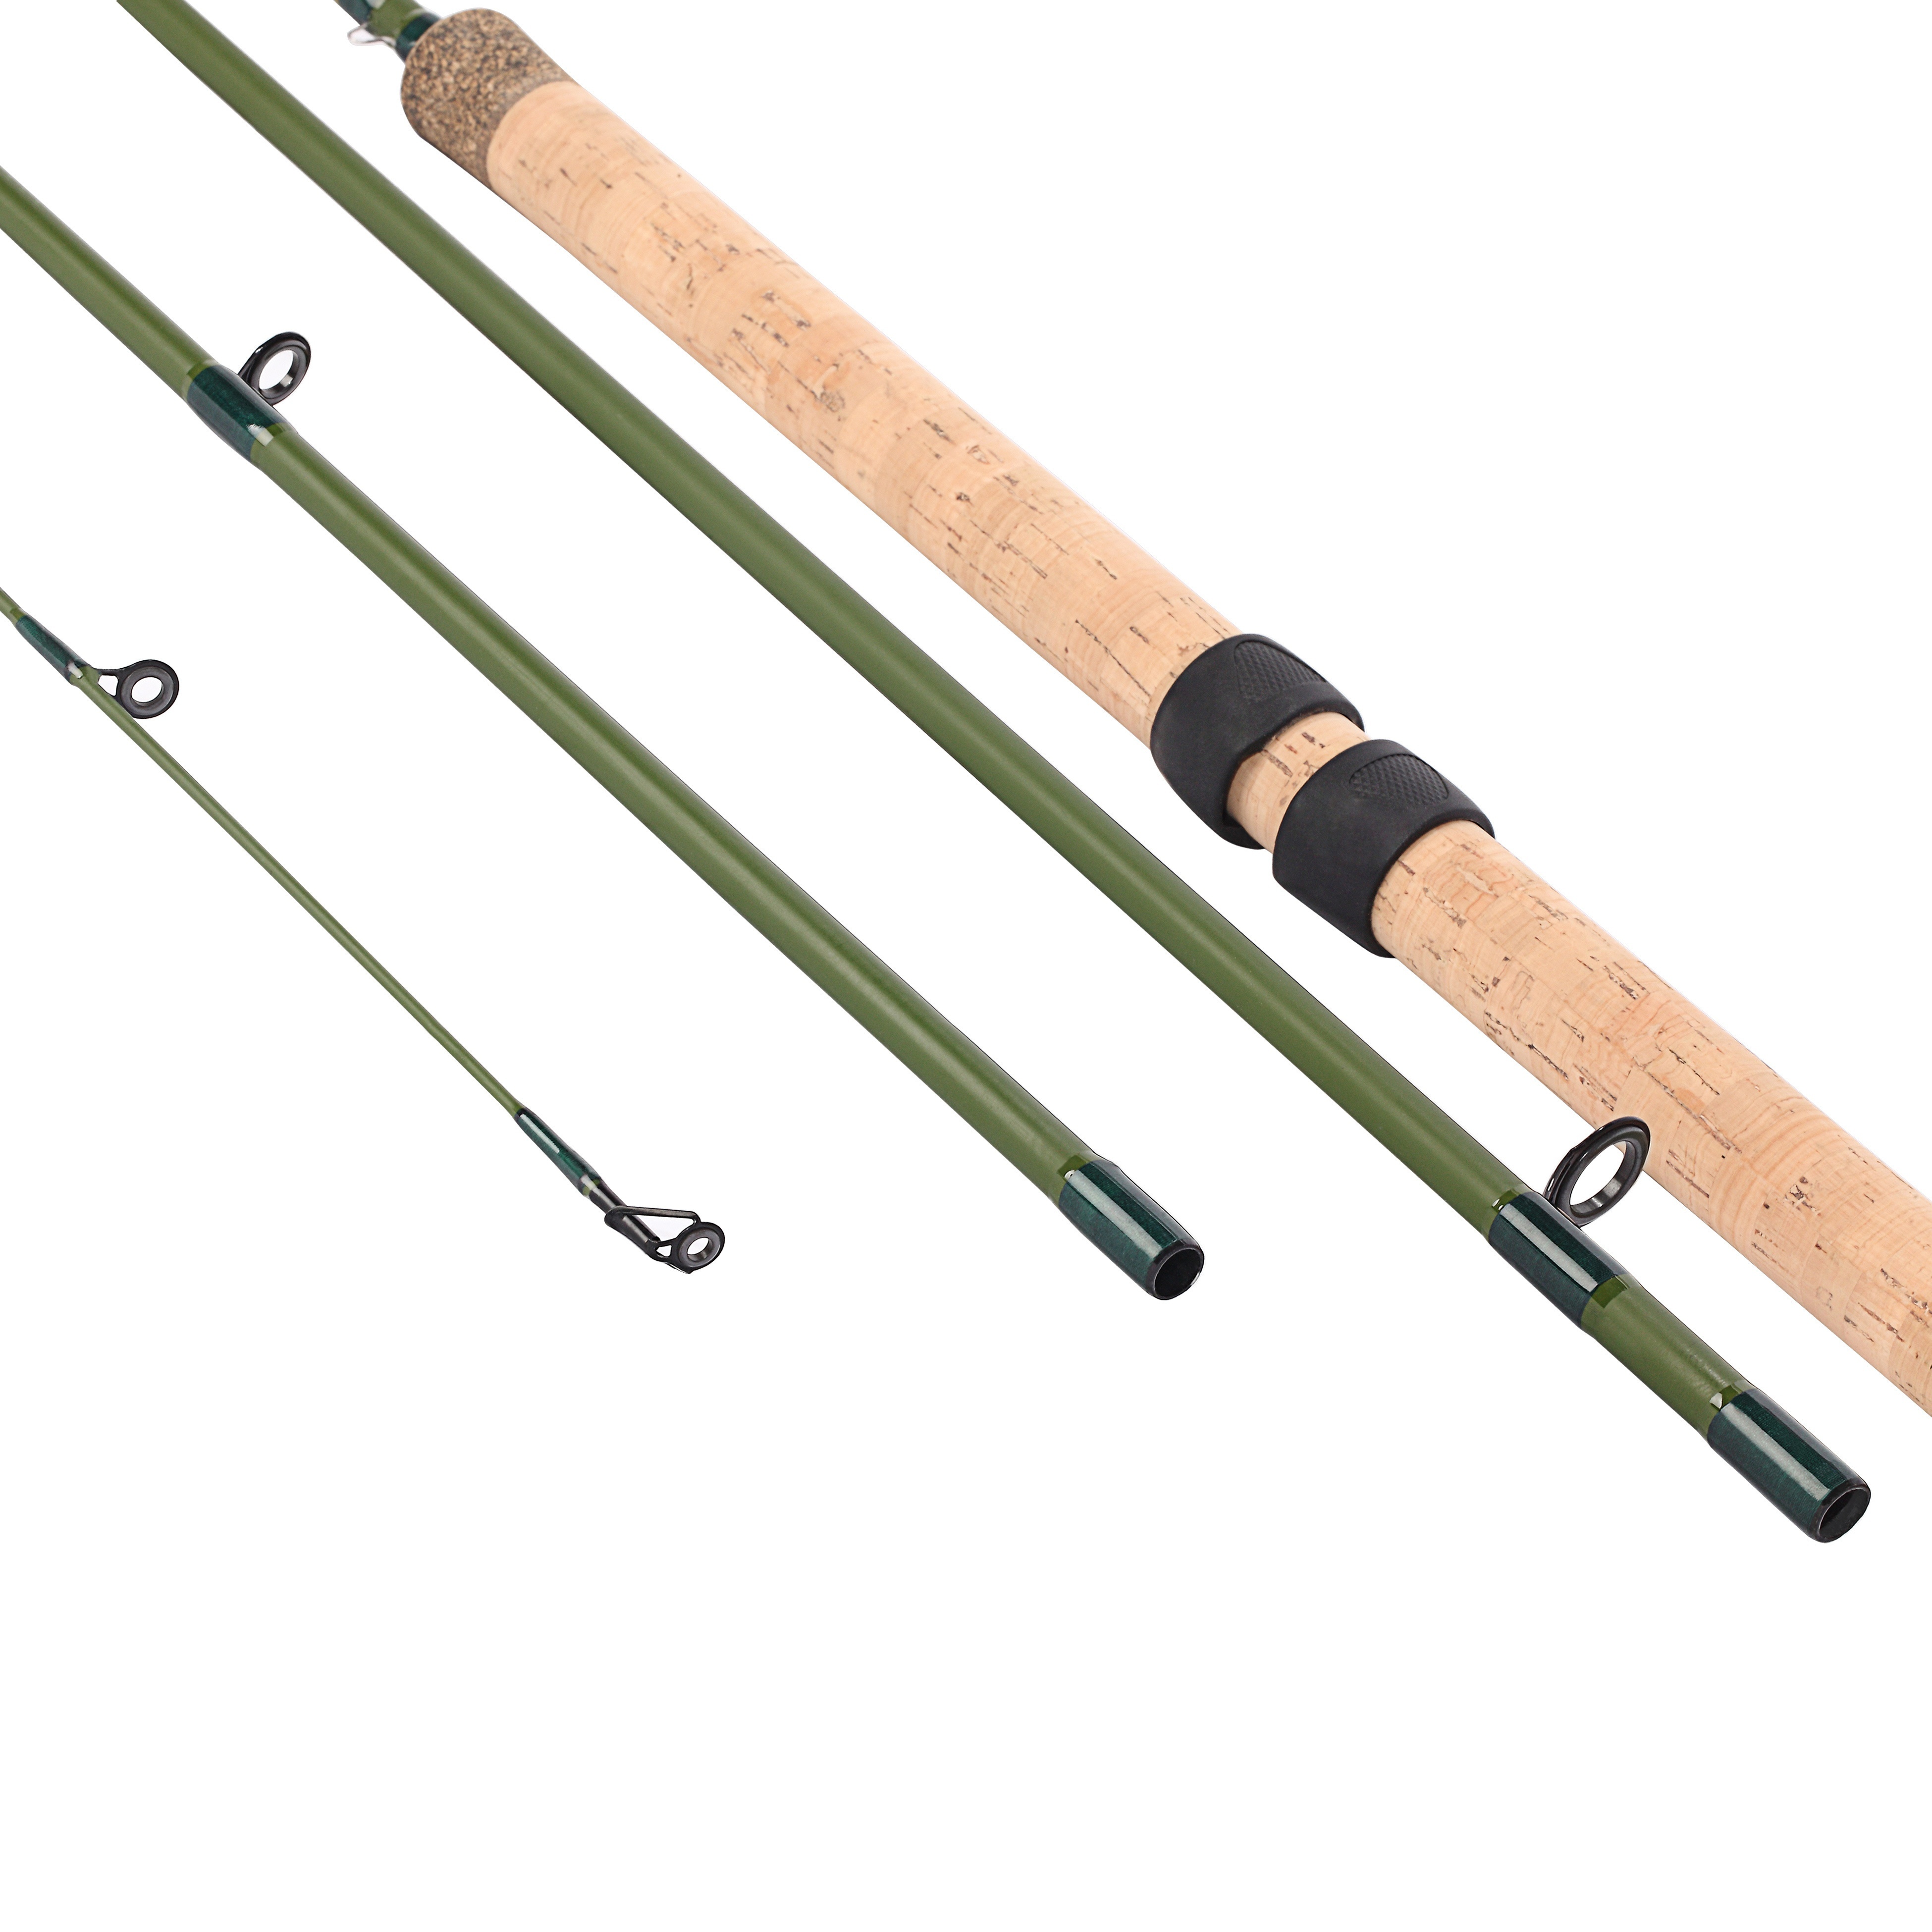 13ft/3.9m Centerpin Float Fishing Rod, 4-piece Carbon Fiber Fishing Rod  With Cork Handle, Comfortable Grip, Light Centerpin Line WT 6-10lbs, For  Steel